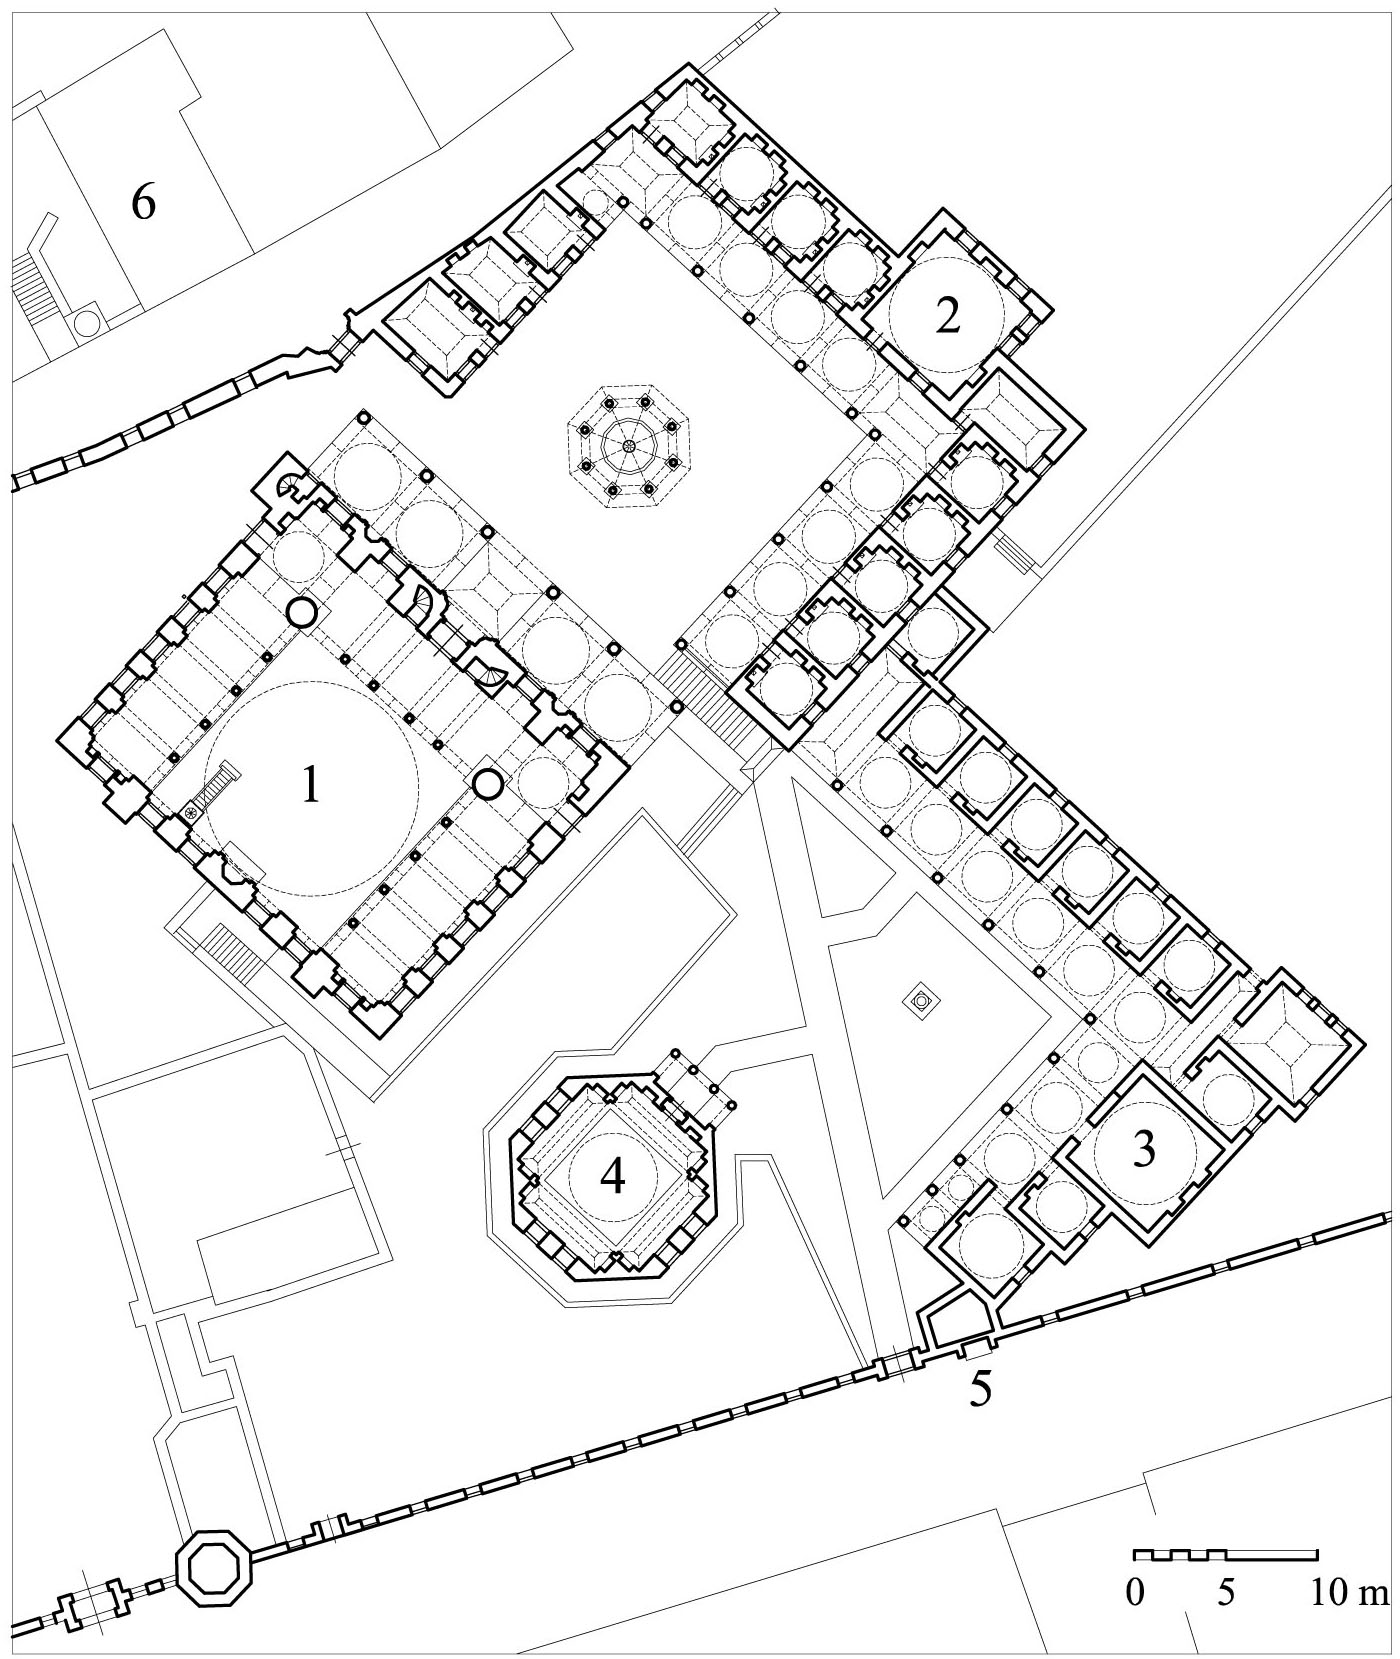 Zal Mahmud Paşa Külliyesi - Floor plan of complex showing (1) mosque, (2) madrasa of Sah Sultan, (3) madrasa of Zal Pasa, (4) mausoleum, (5) dated public fountain, (6) pre-existing masjid of Silahi Mehmed Bey. DWG file in AutoCAD 2000 format. Click the download button to download a zipped file containing the .dwg file.